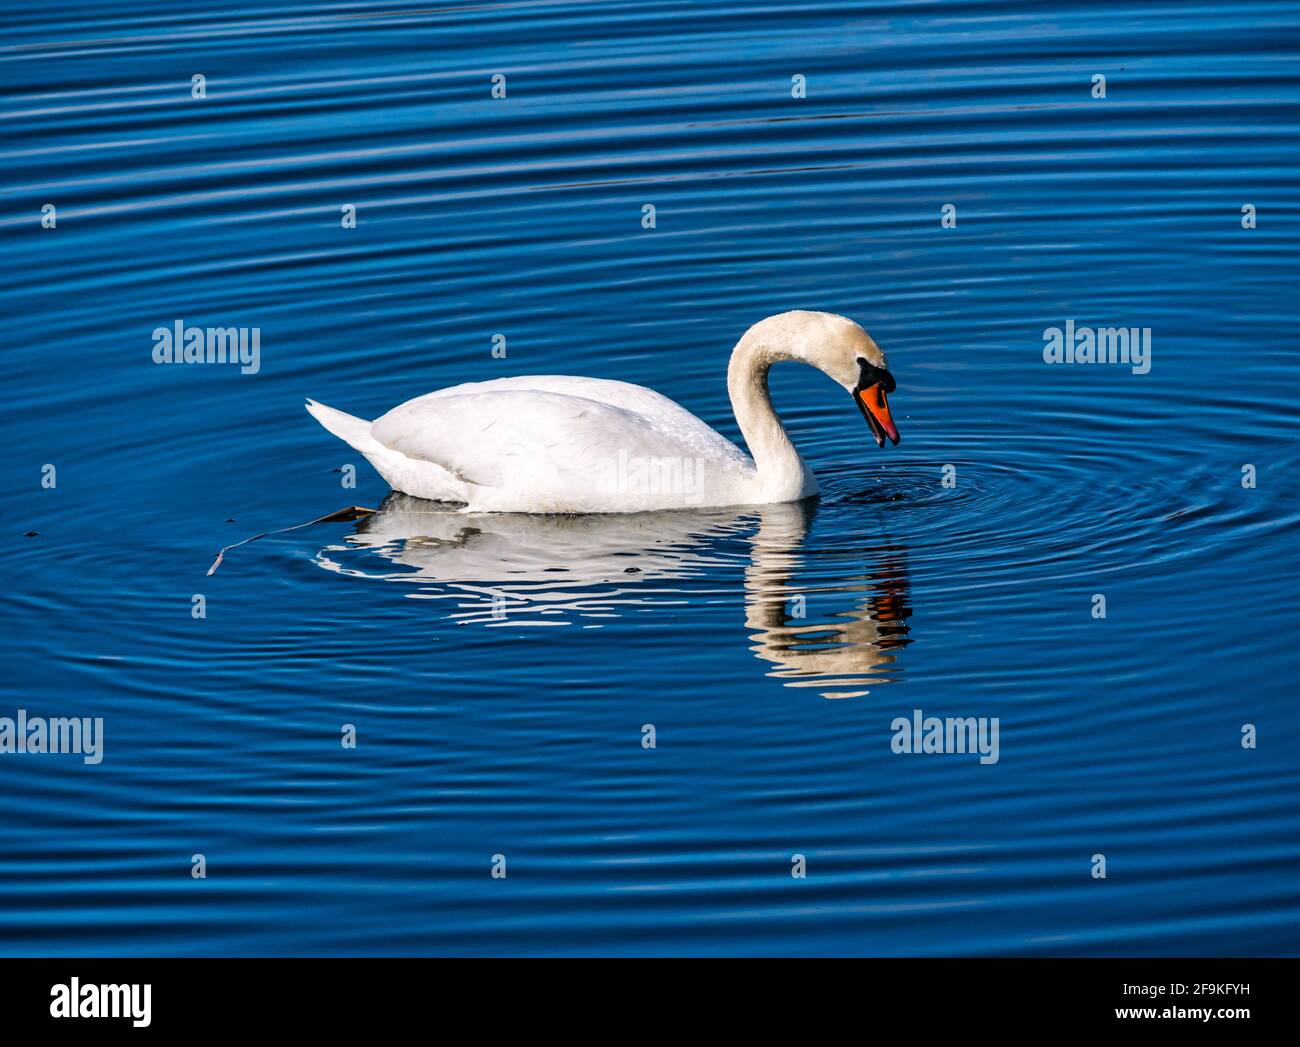 A male mute swan (Cygnus olor) swimming in a reservoir in sunshine creating circular water ripples, Scotland, UK Stock Photo